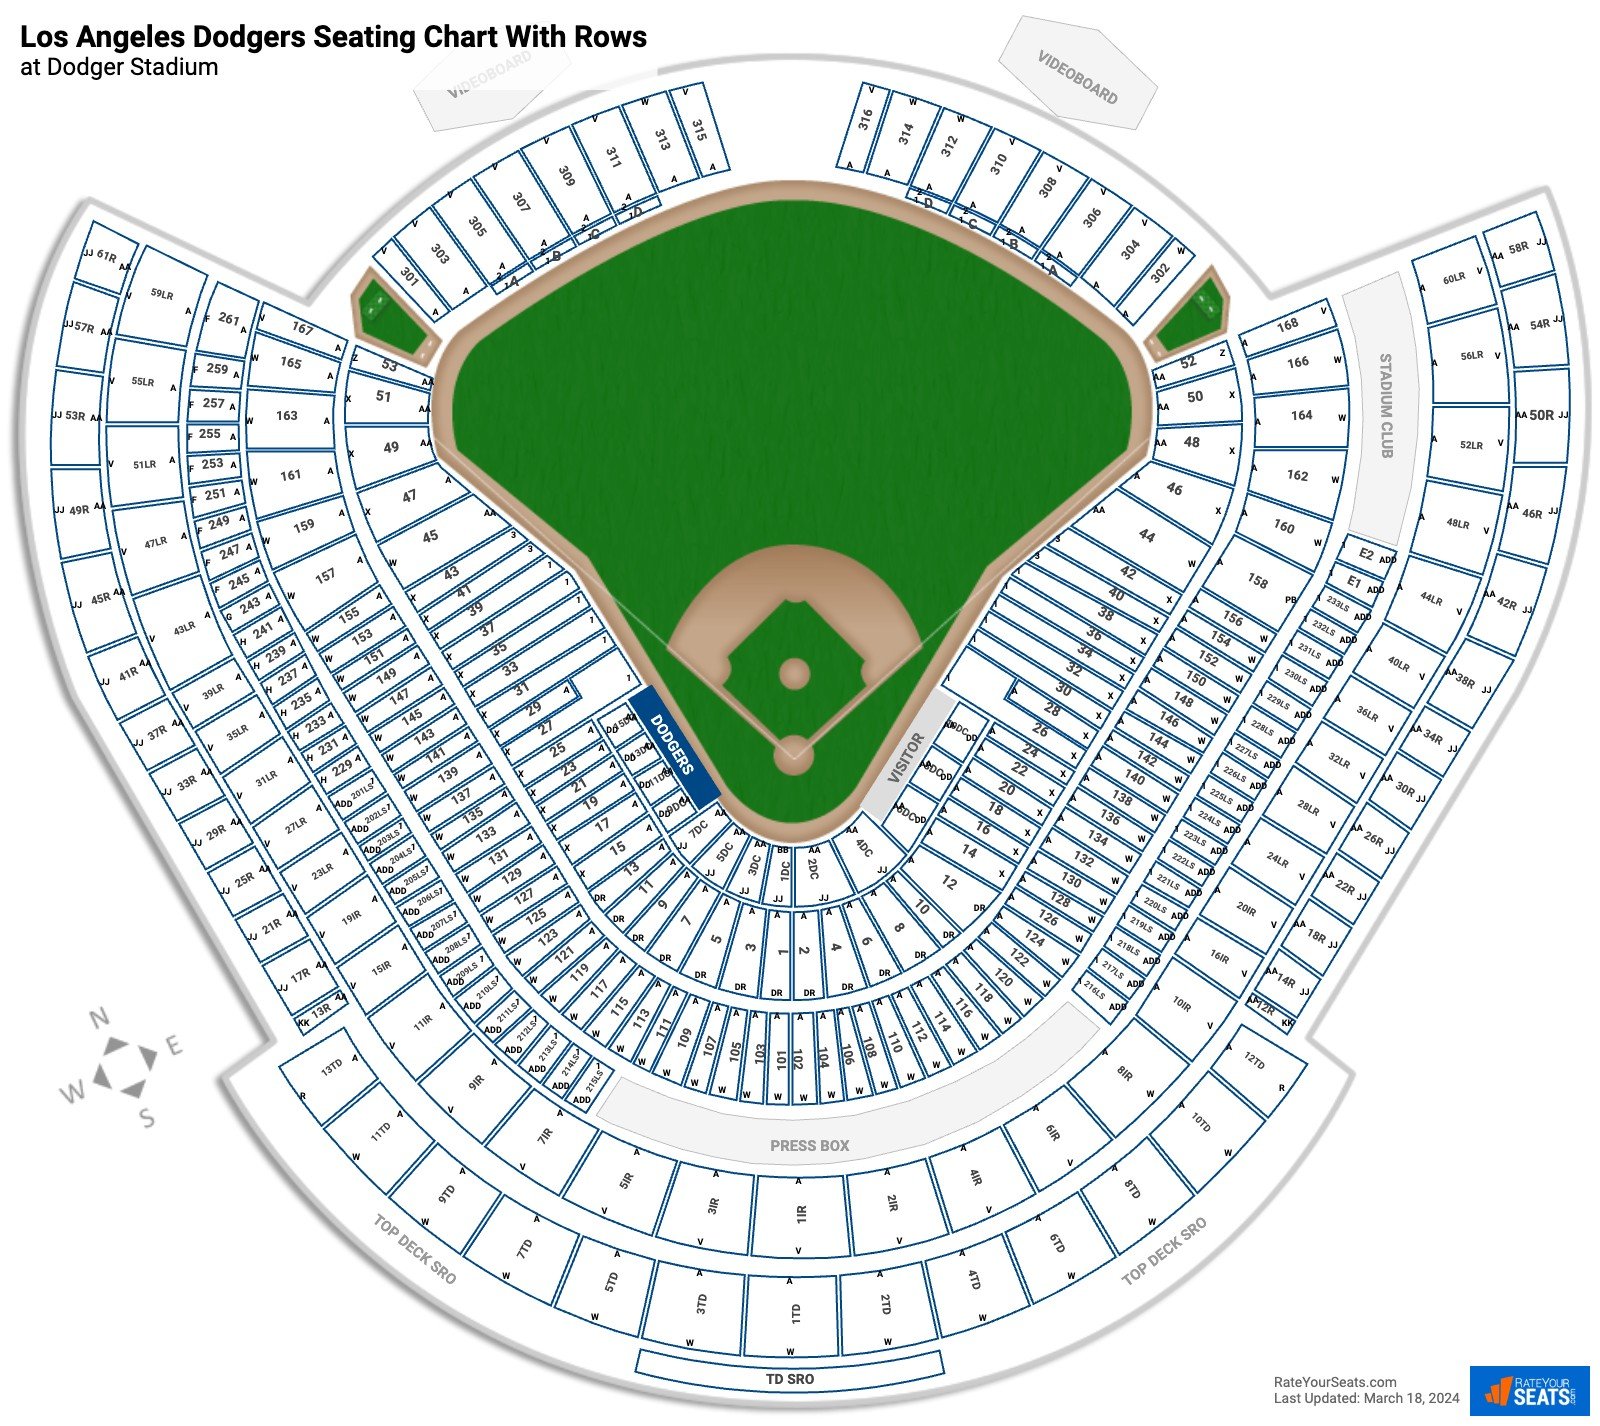 Los Angeles Dodgers Seating Charts At Dodger Stadium Rateyourseats Com